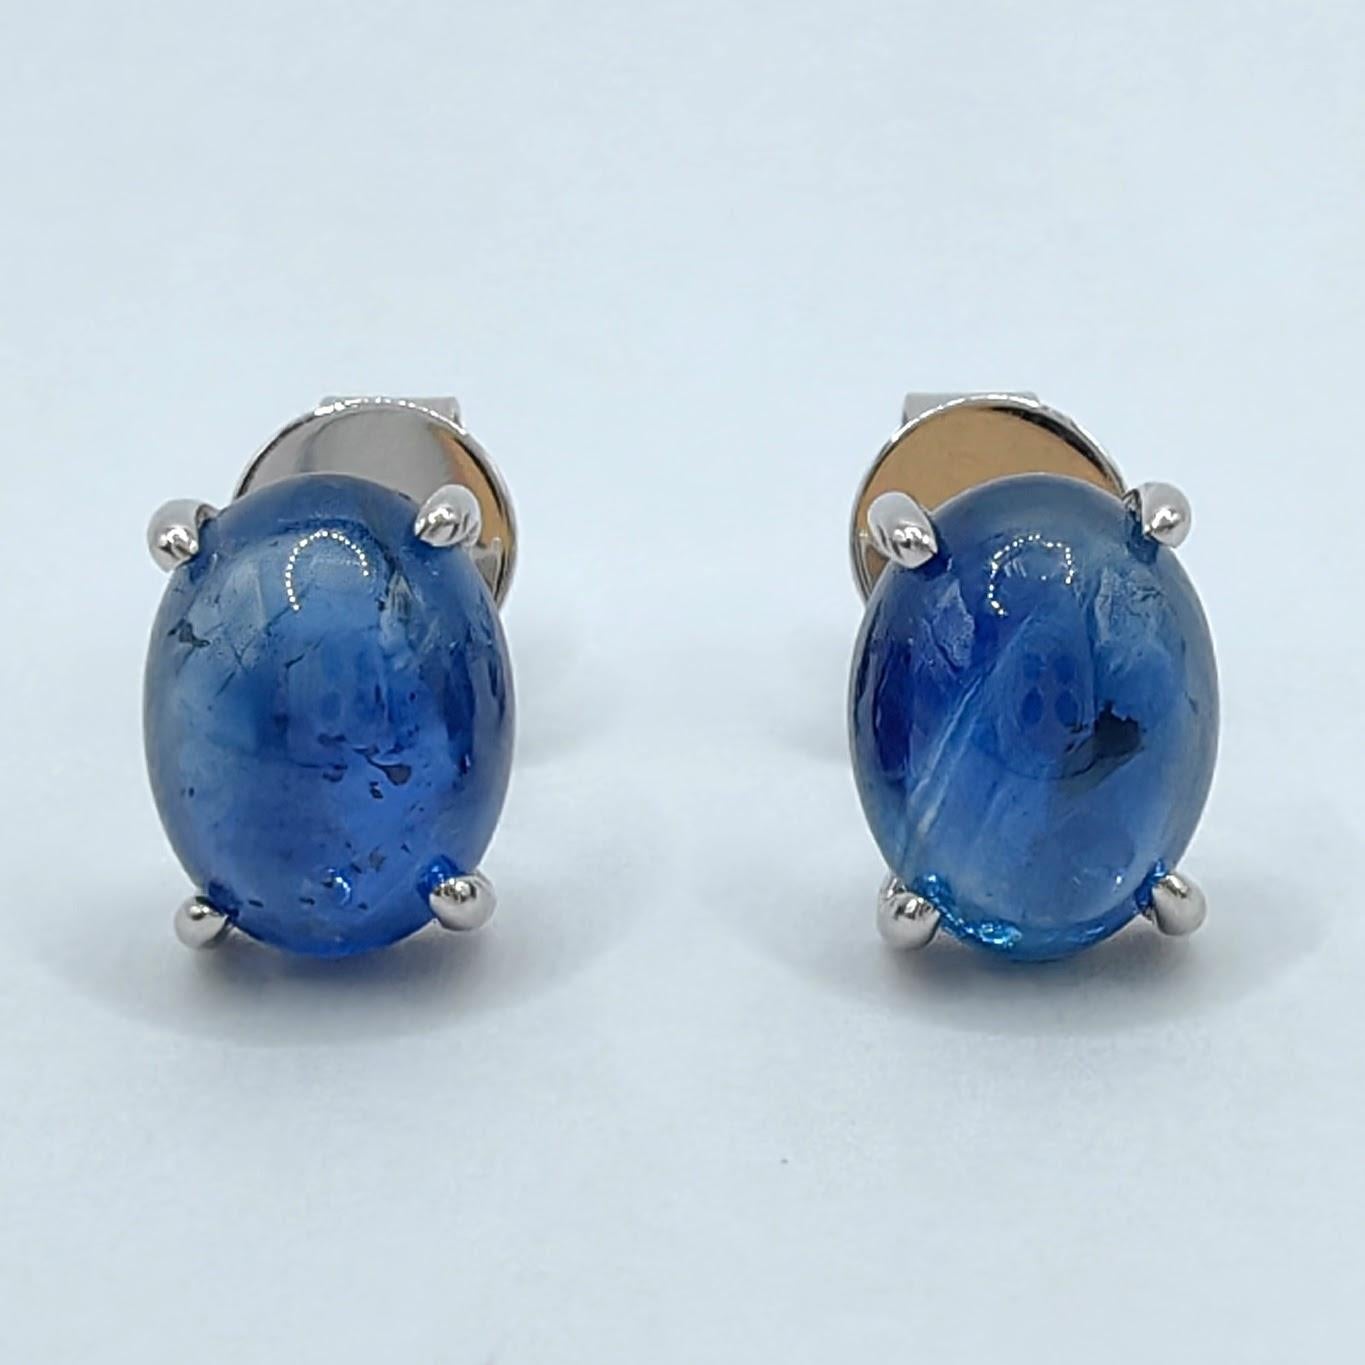 Introducing our stunning Matched 4.24 Carat 8x6mm Cabochon Blue Sapphire Stud Earrings, where the timeless beauty of blue sapphires and the elegance of 18K white gold harmonize to create a truly remarkable piece.

These earrings feature two